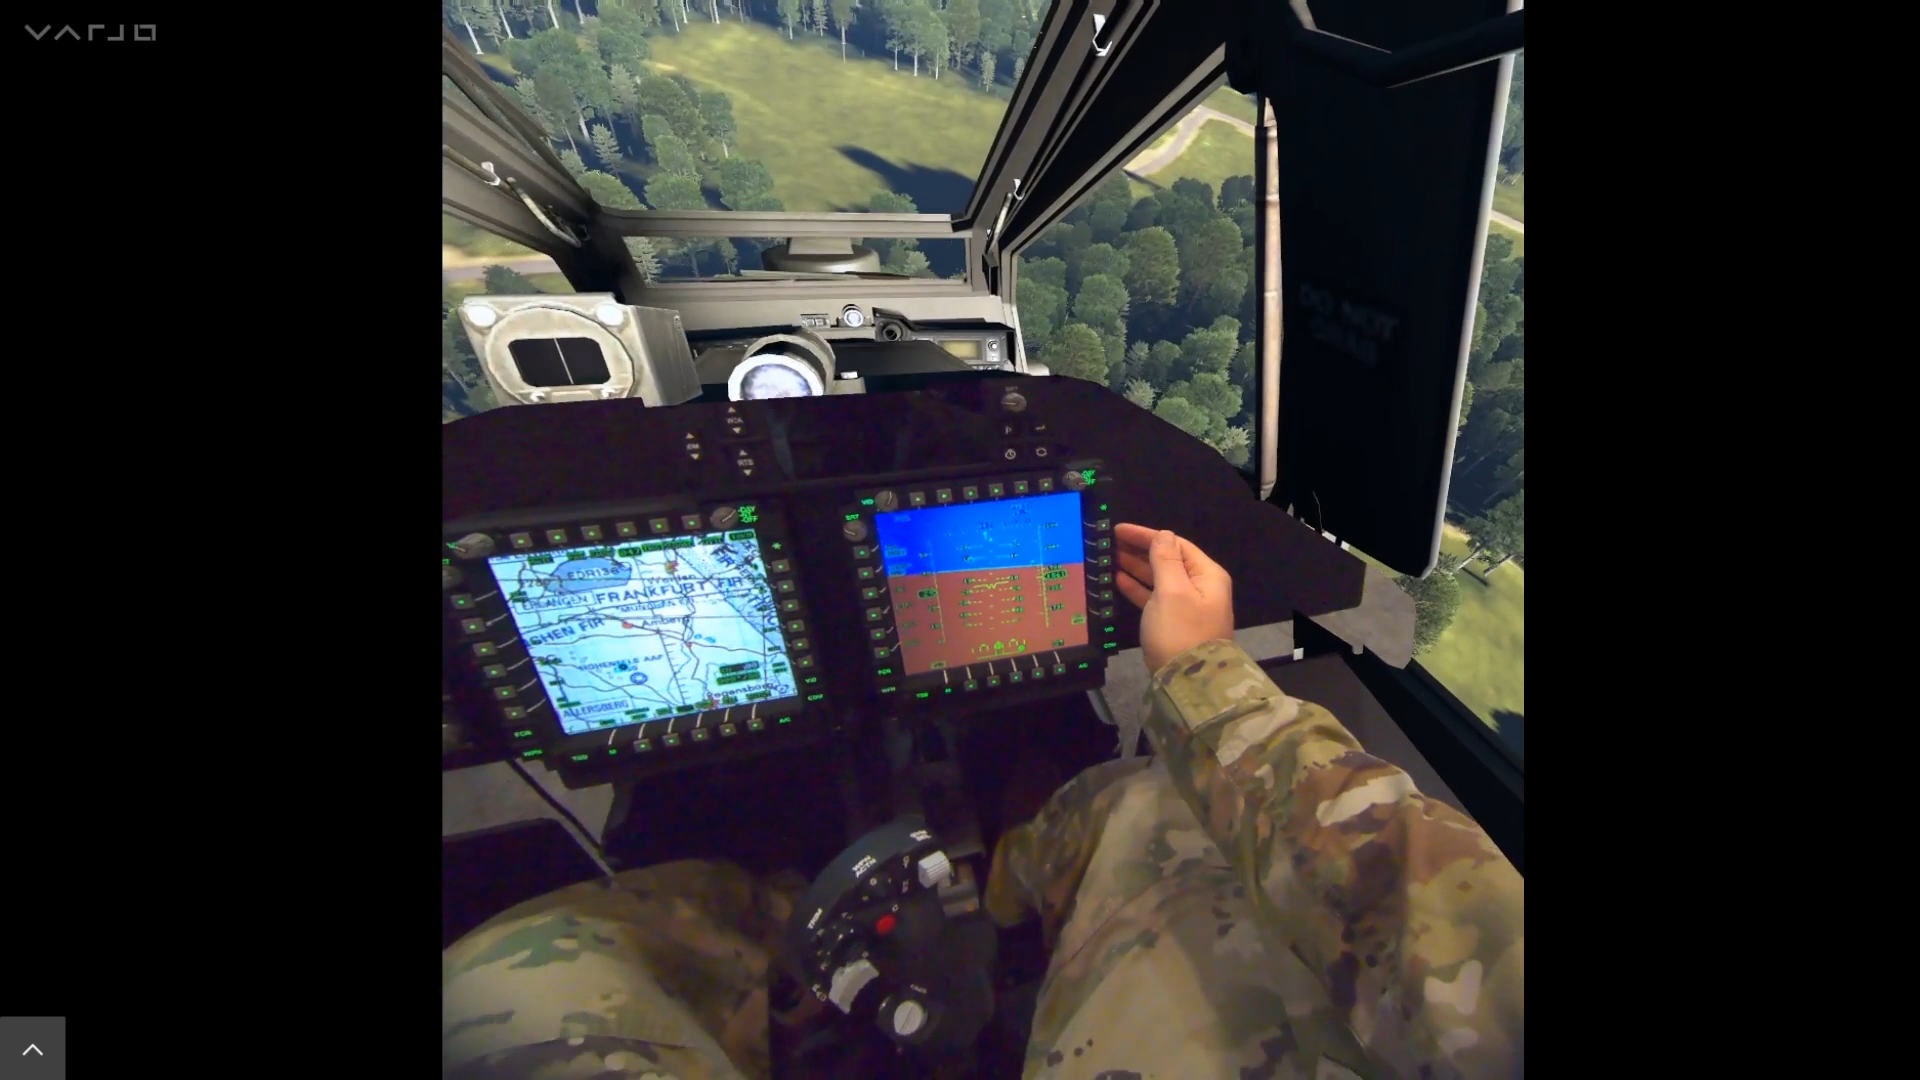 VBS Blue IG mixed reality Apache helicopter cockpit view using tech from Bugeye, Zedasoft and Birhle.